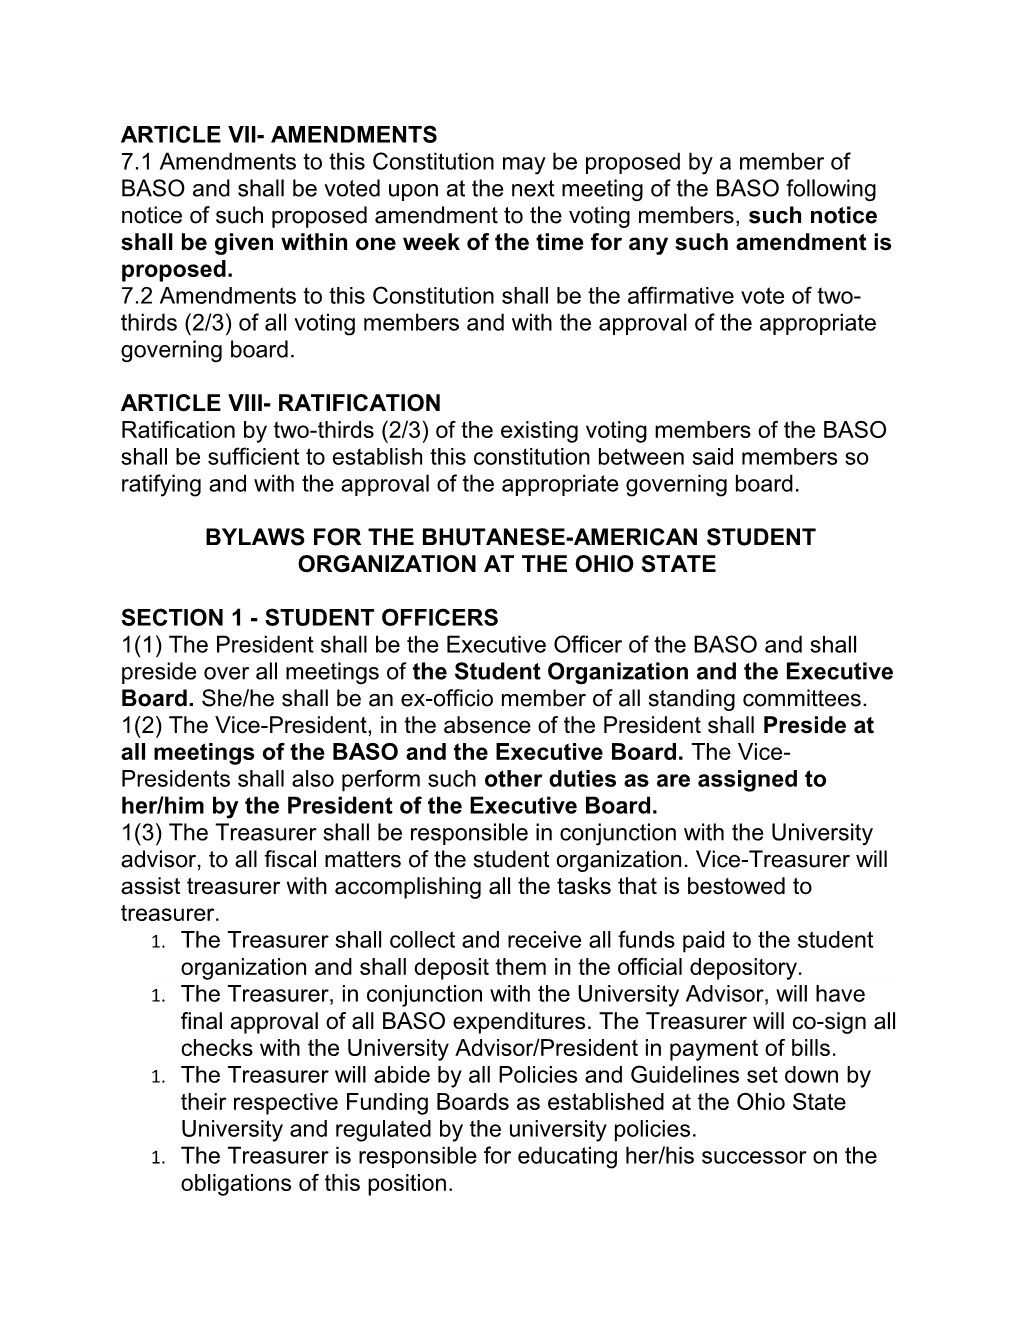 Constitution for the Bhutanese-American Student Organization and Bylaws